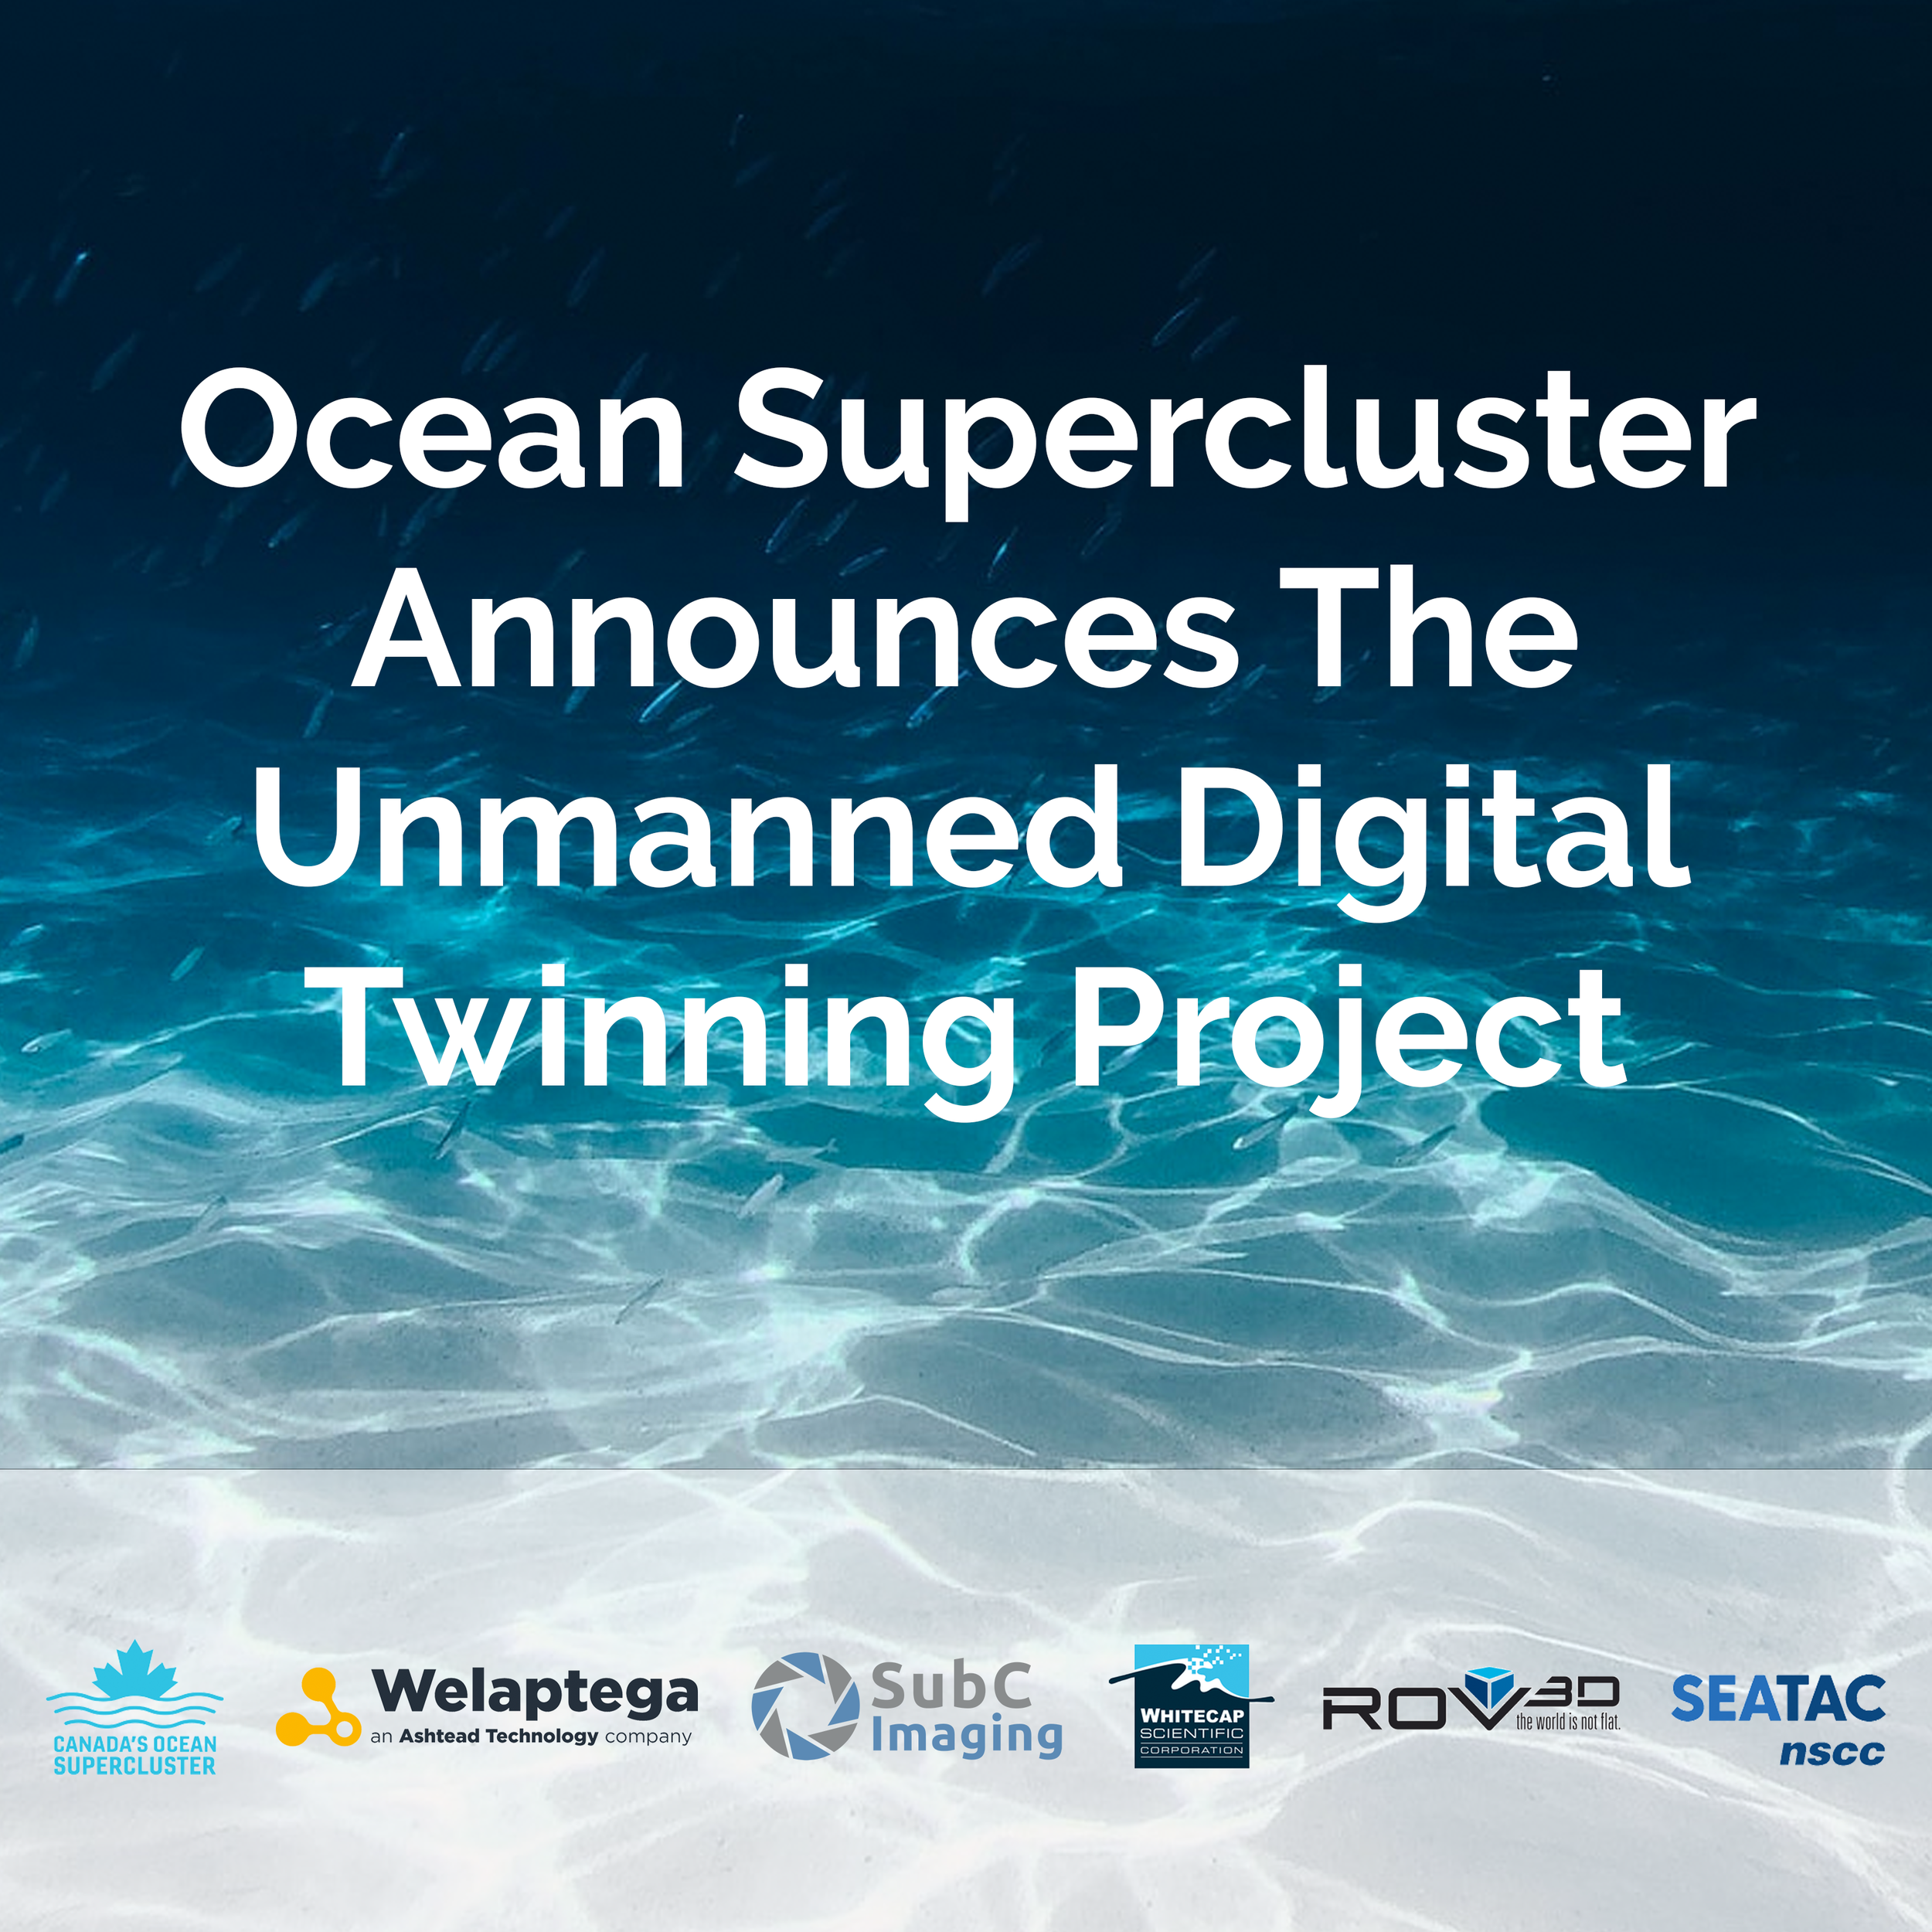 Ocean Supercluster Announces The Unmanned Digital Twinning Project